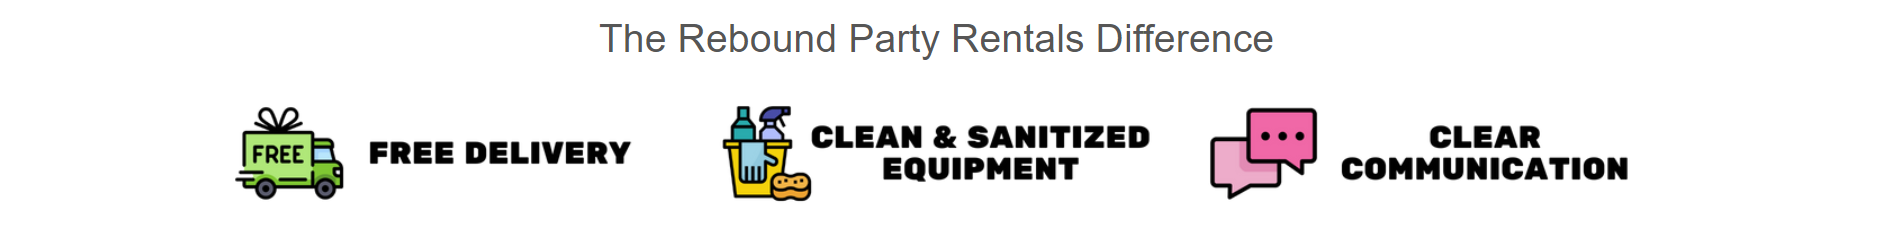 free delivery or clean and sanitized party rentals